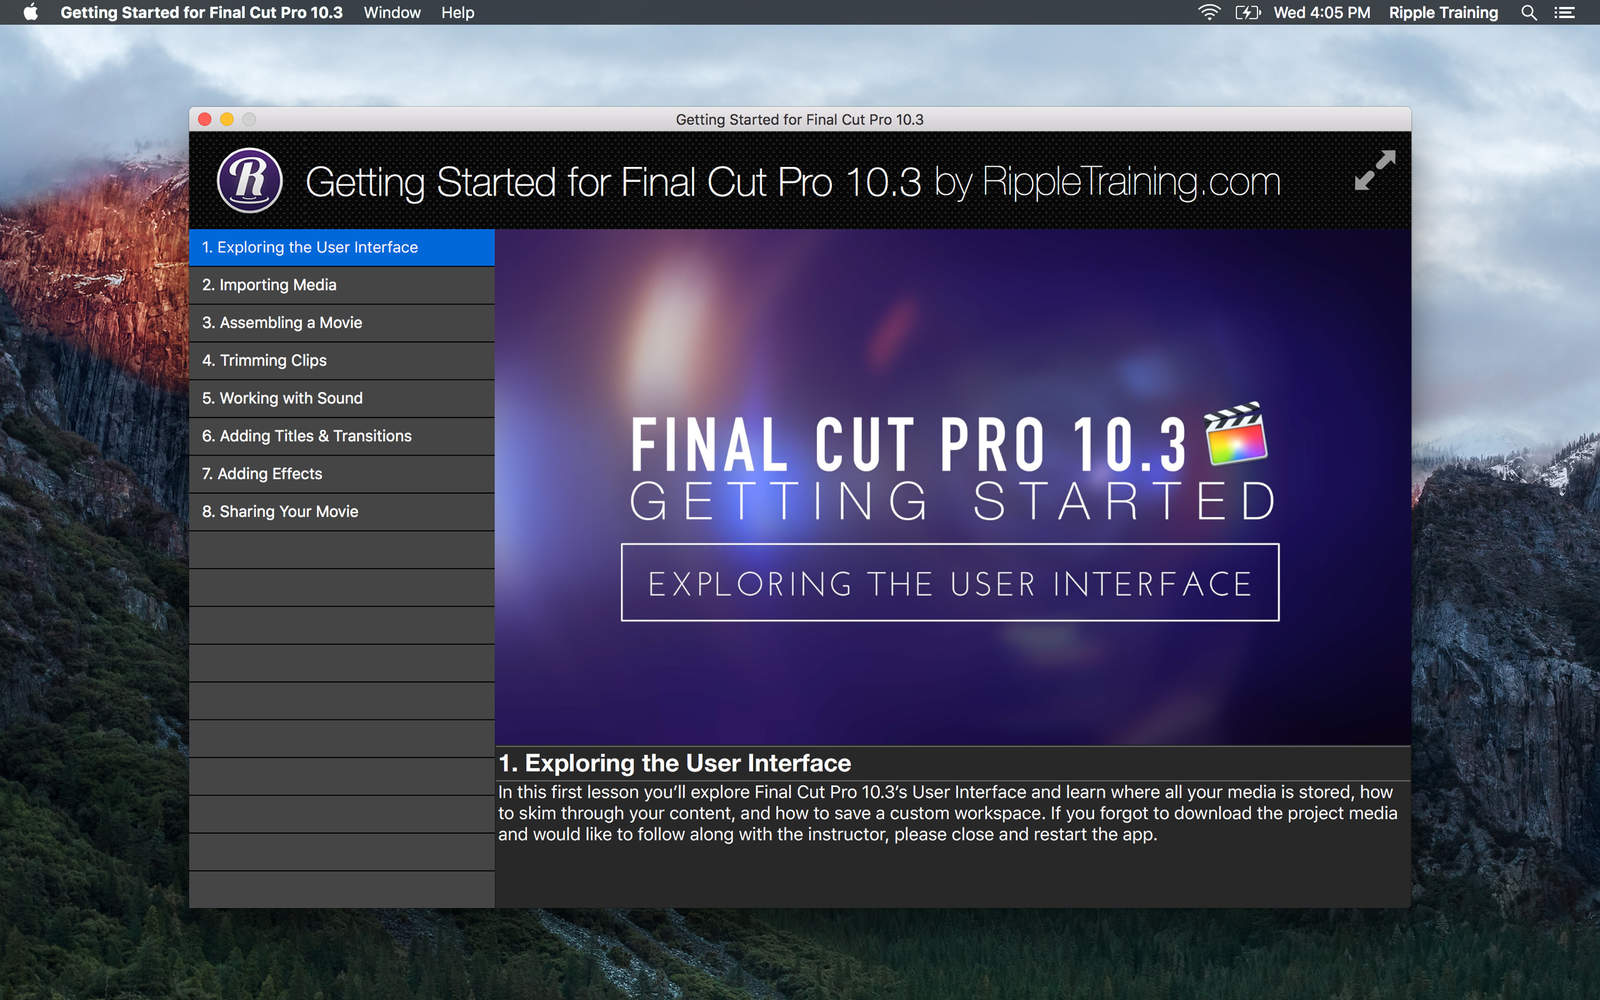 Getting Started for Final Cut Pro 1.0 : Main Window